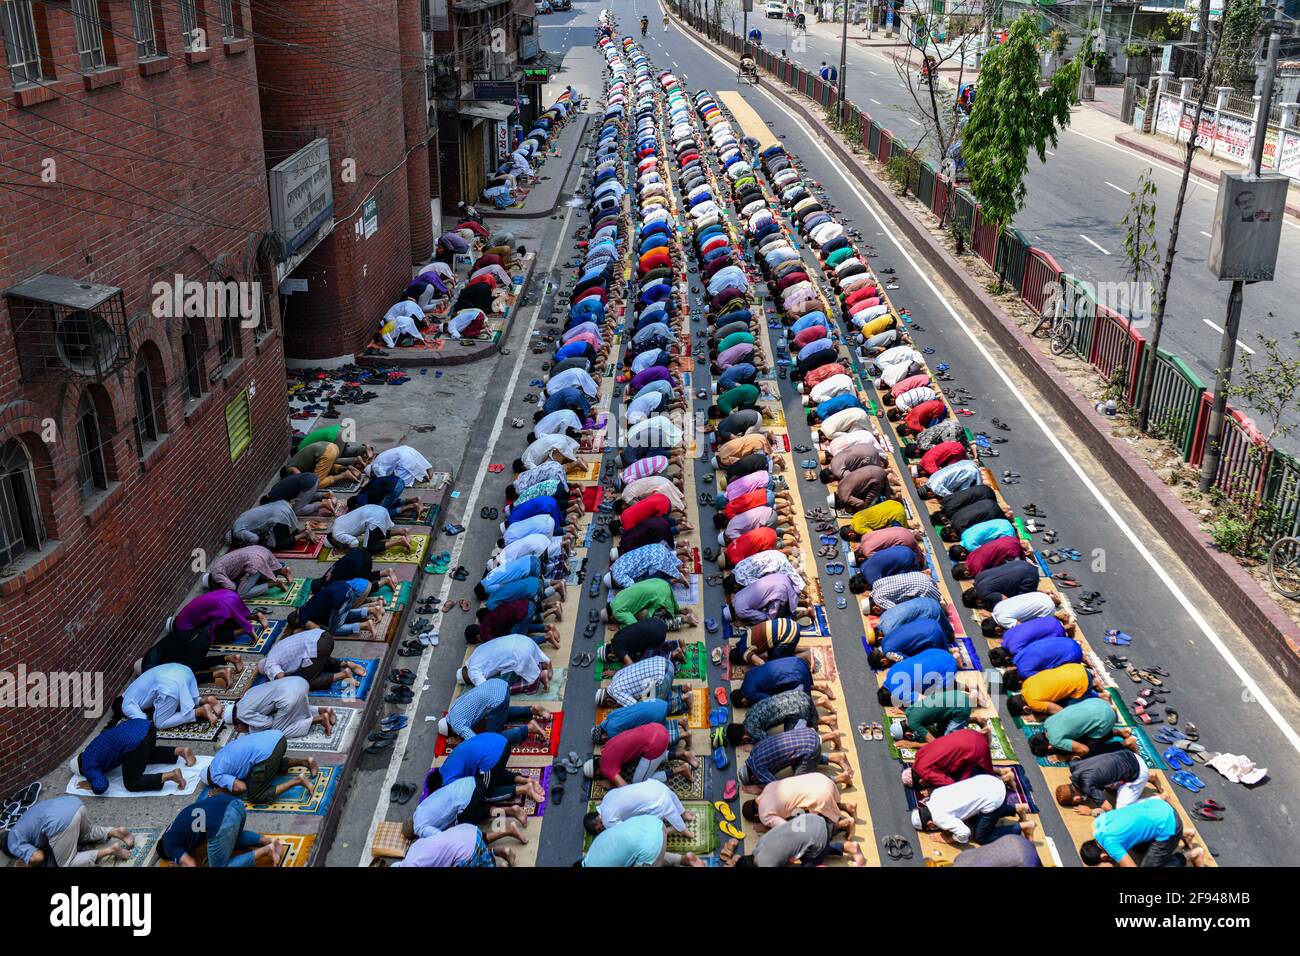 Dhaka, Dhaka, Bangladesh. 16th Apr, 2021. Muslims performed the Jumma prayer on a street without maintaining any kind of social distance the first Friday of the holy month of Ramadan during Bangladesh's authorities enforced a strict lockdown to combat the spread of the Covid-19 coronavirus, in Dhaka, Bangladesh on April 16, 2021. Credit: Zabed Hasnain Chowdhury/ZUMA Wire/Alamy Live News Stock Photo